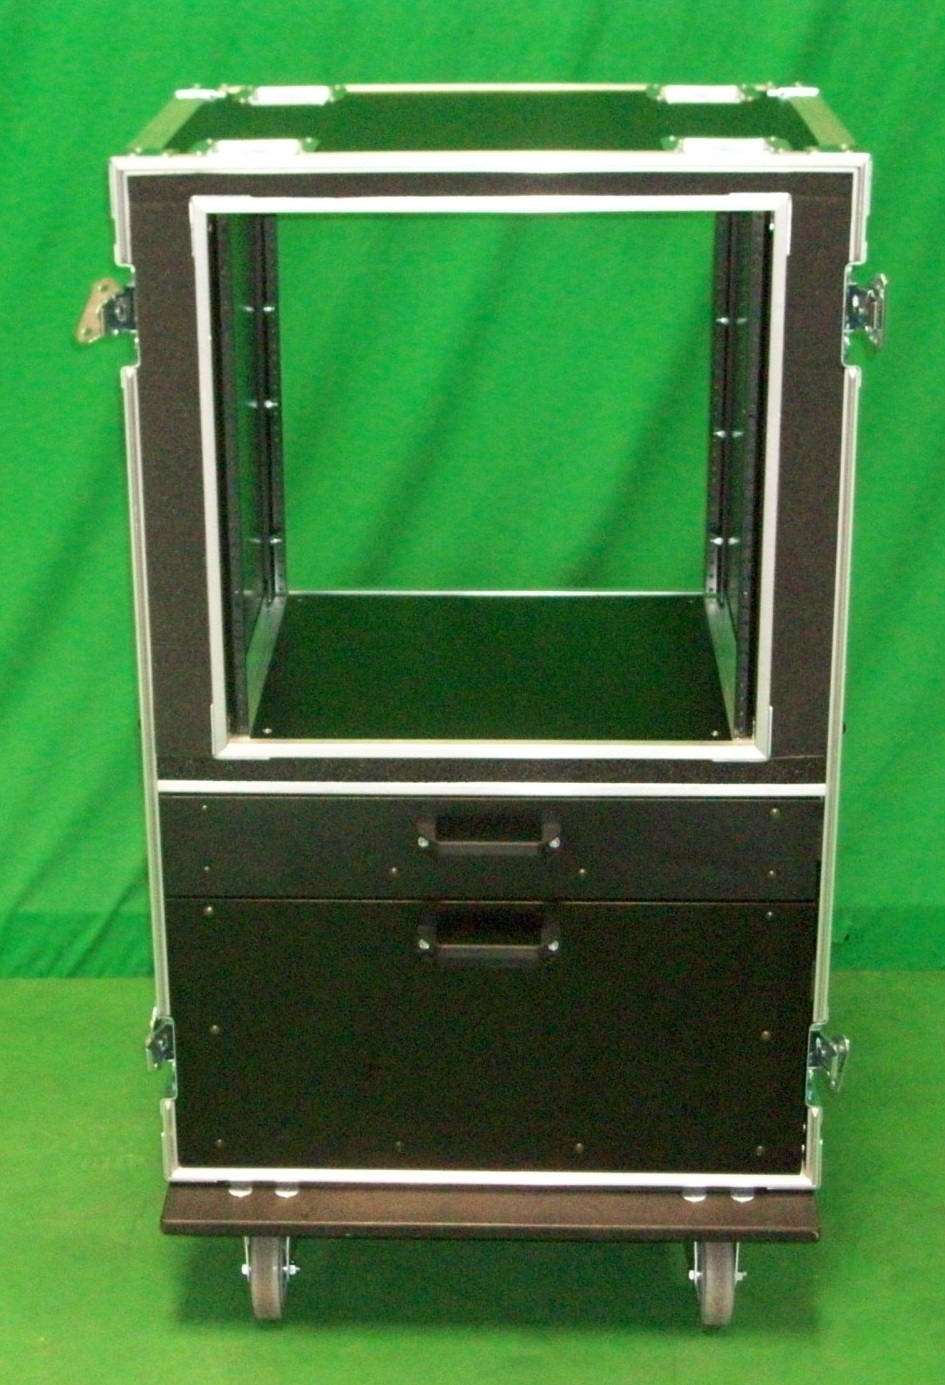 Print # 6261 - Custom case for 11 RU shock mount rack with (1) Foam Insert for (8) Shure Beta 87C HH Mic. and (8) Shure ULXD1 body Pack . By Nelson Case Corp